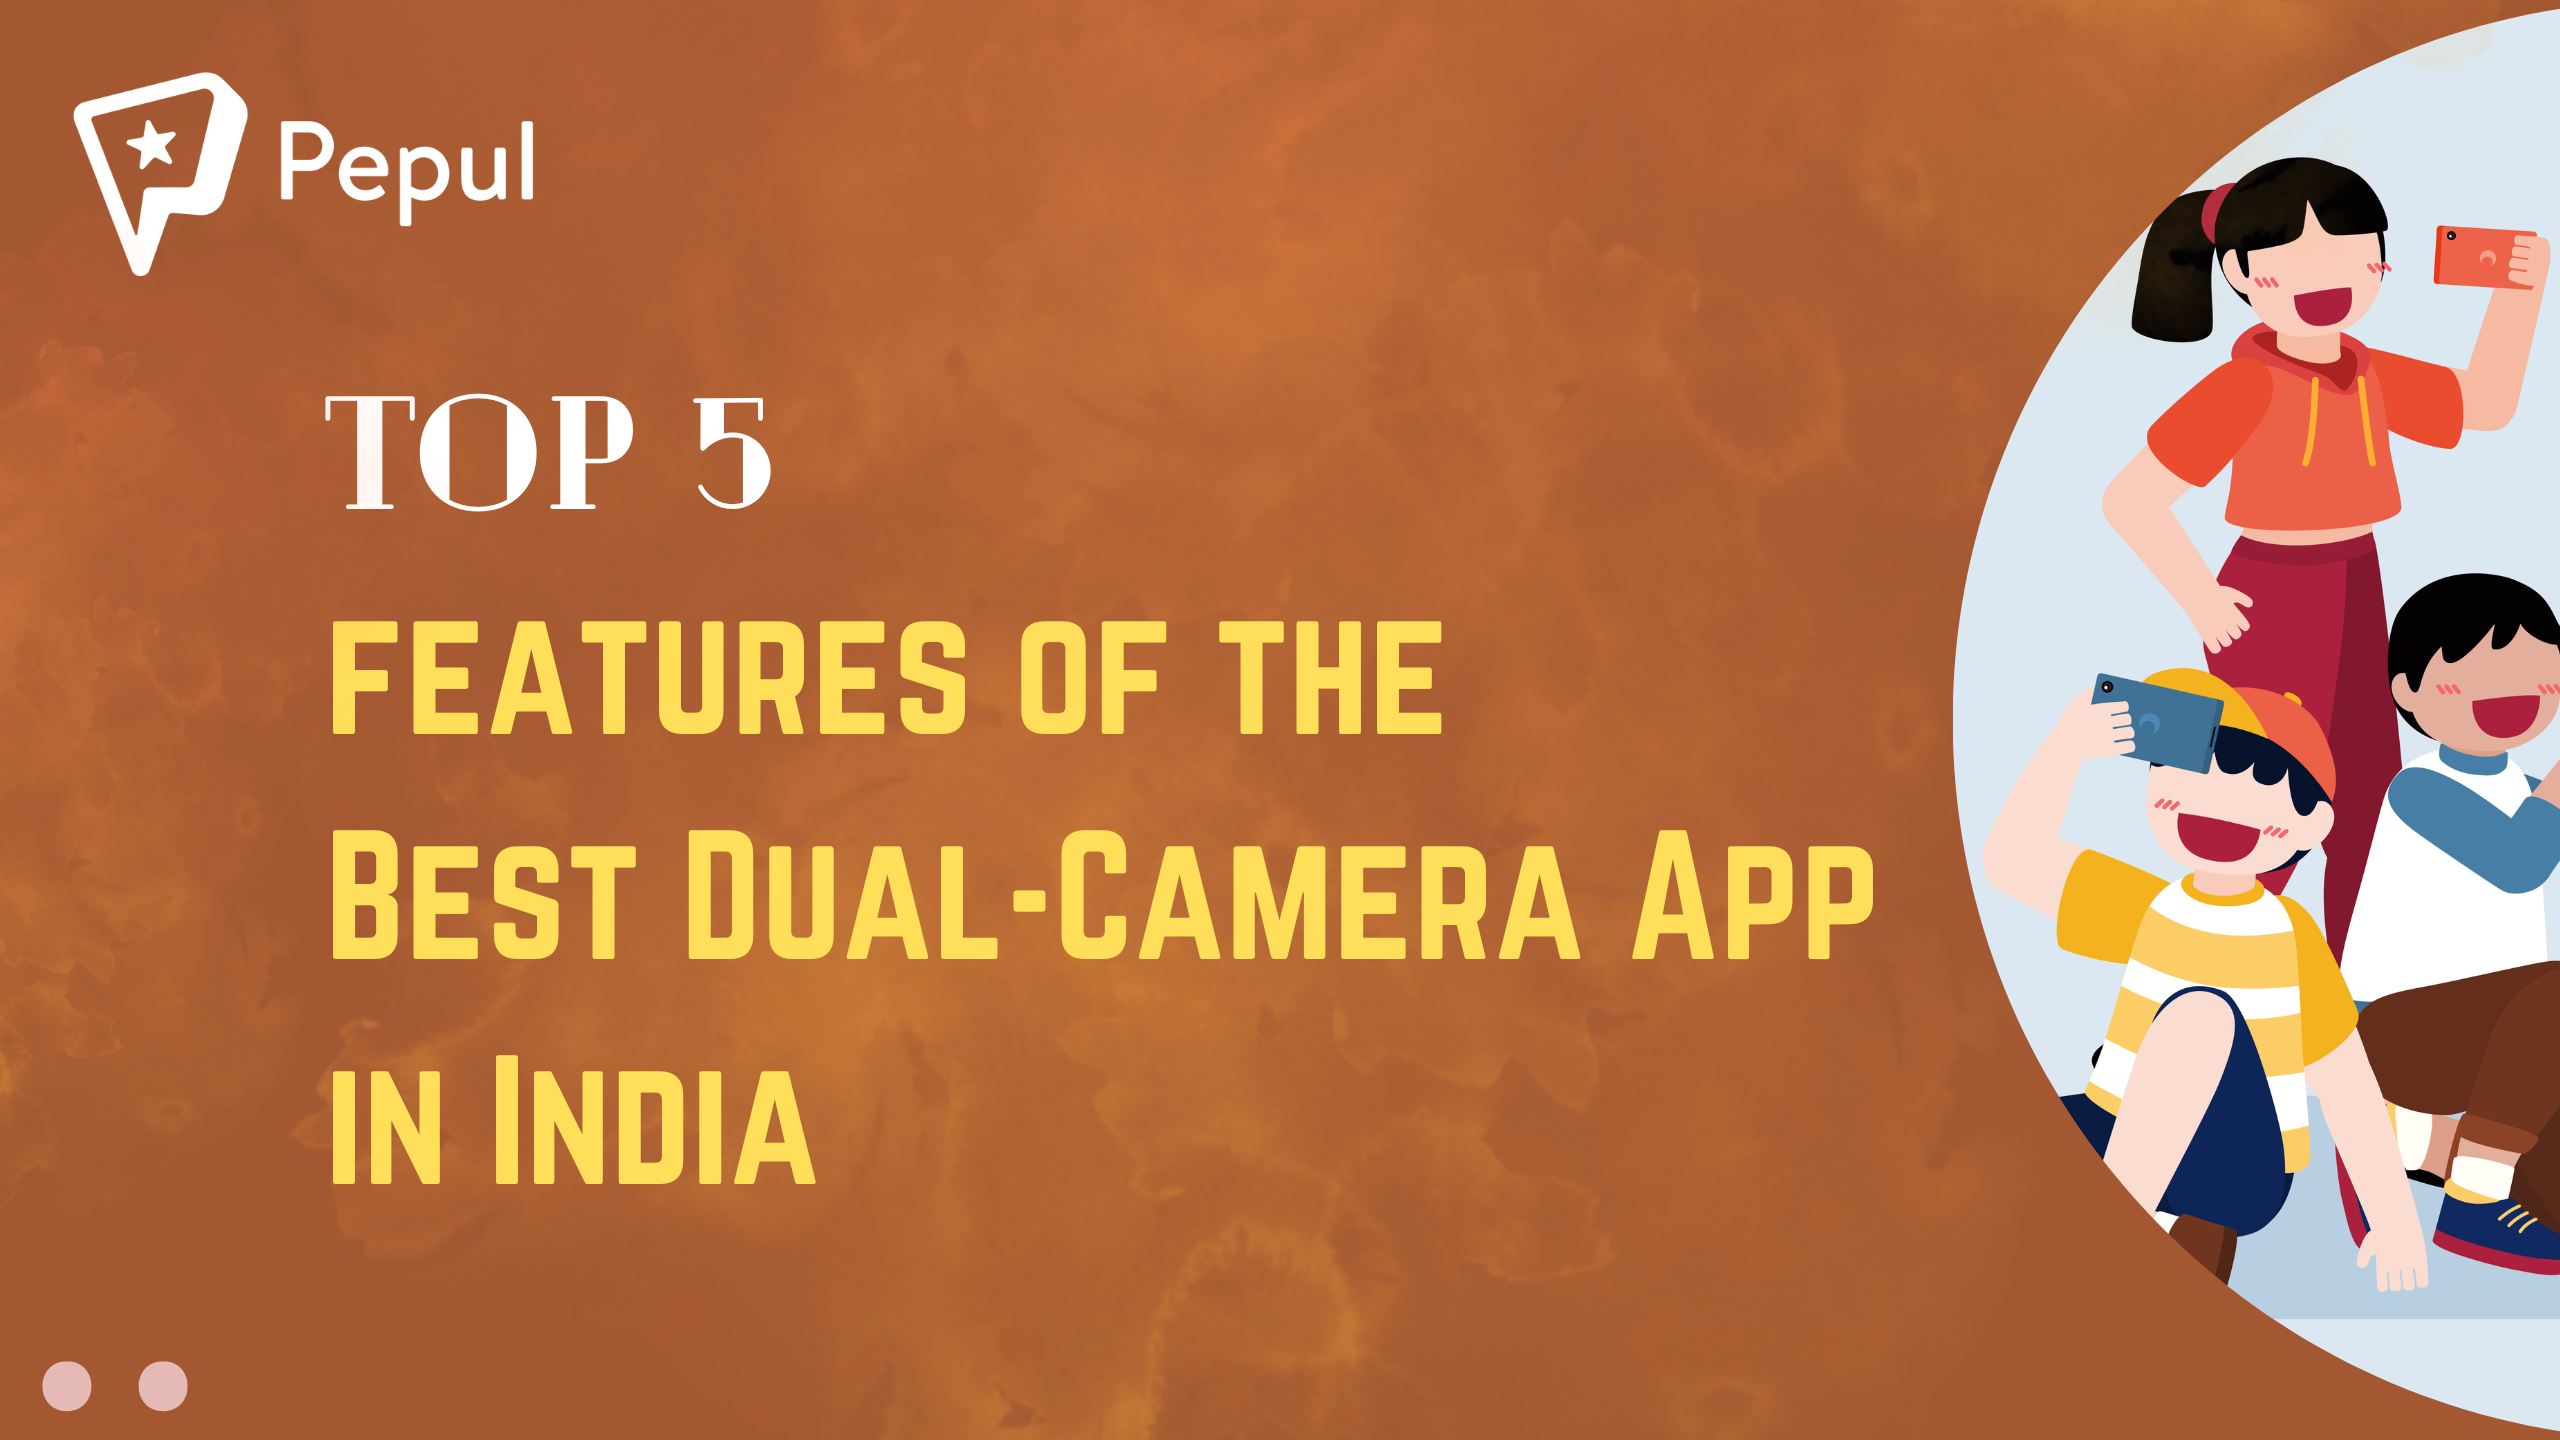 Top 5 Features of the Best Dual-Camera App in India